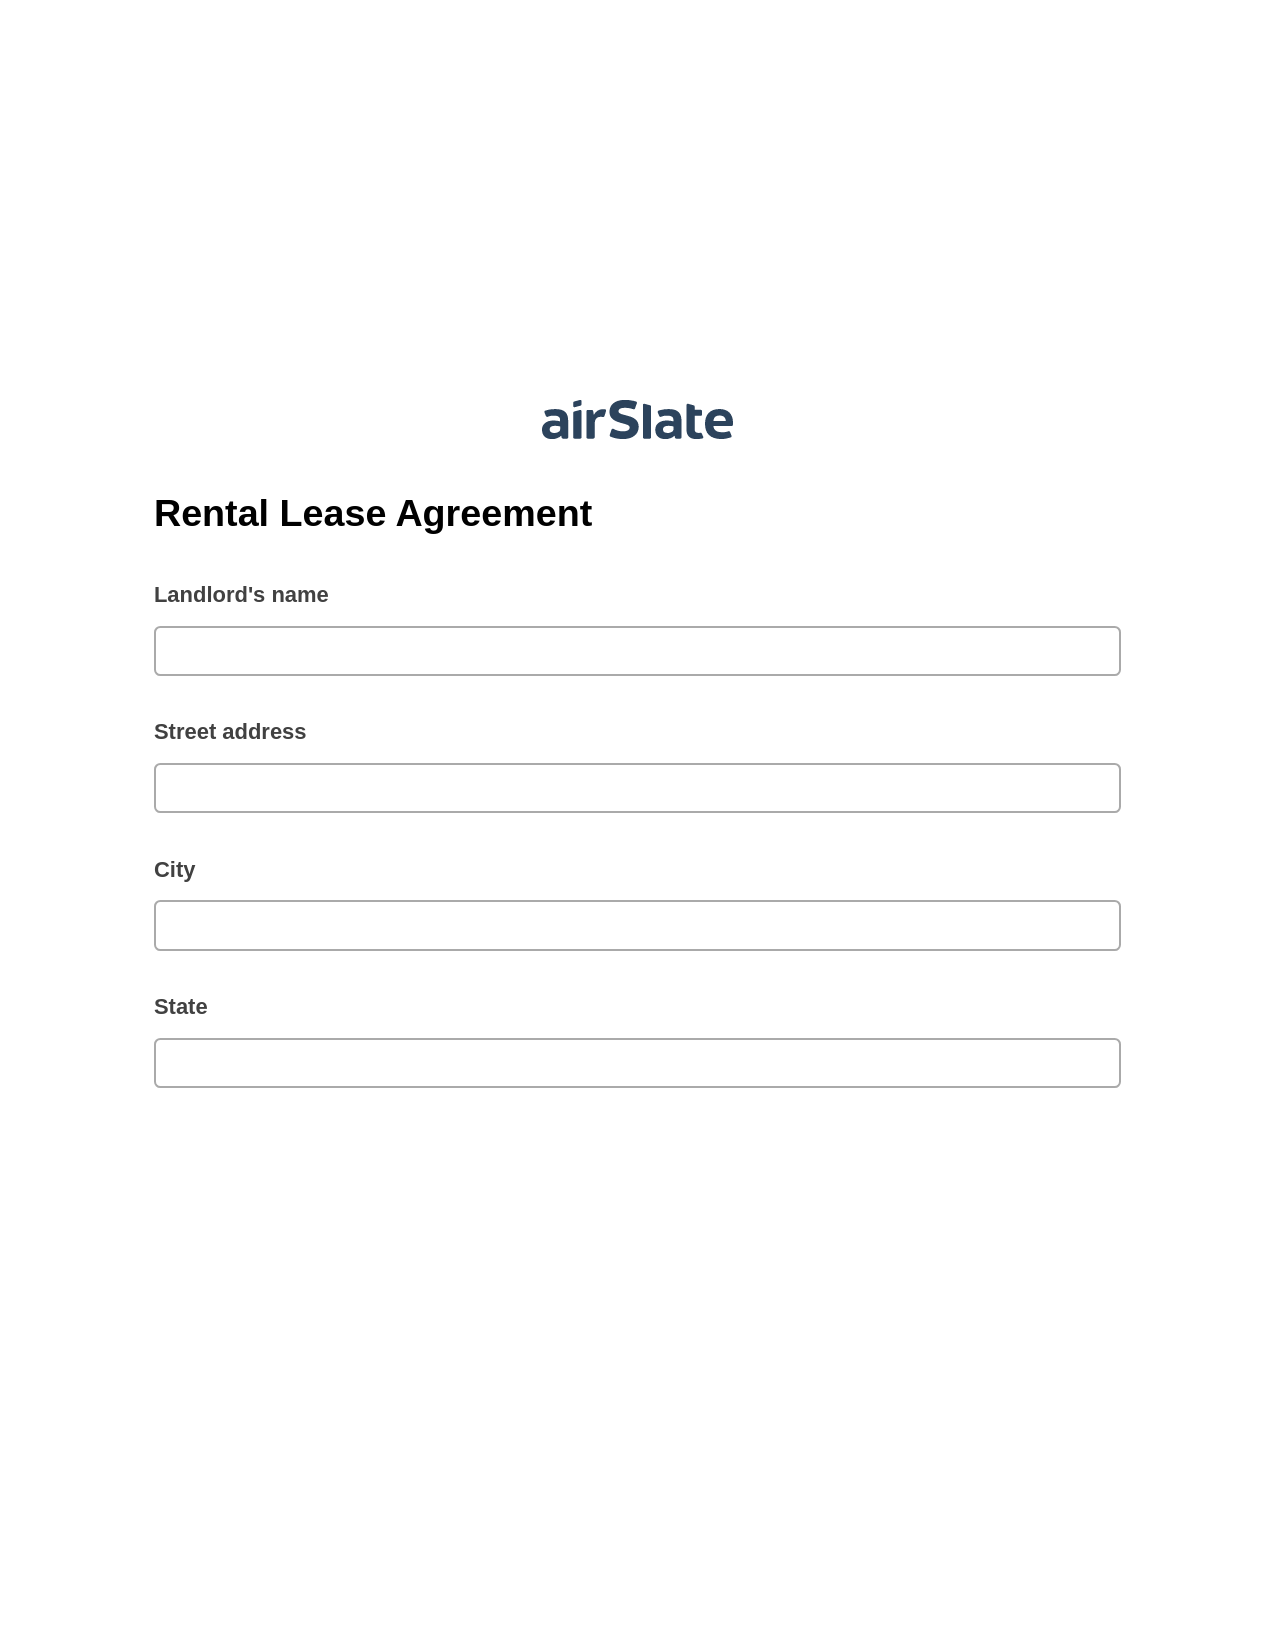 Rental Lease Agreement Pre-fill from MySQL Dropdown Options Bot, Update MS Dynamics 365 Record Bot, Email Notification Postfinish Bot